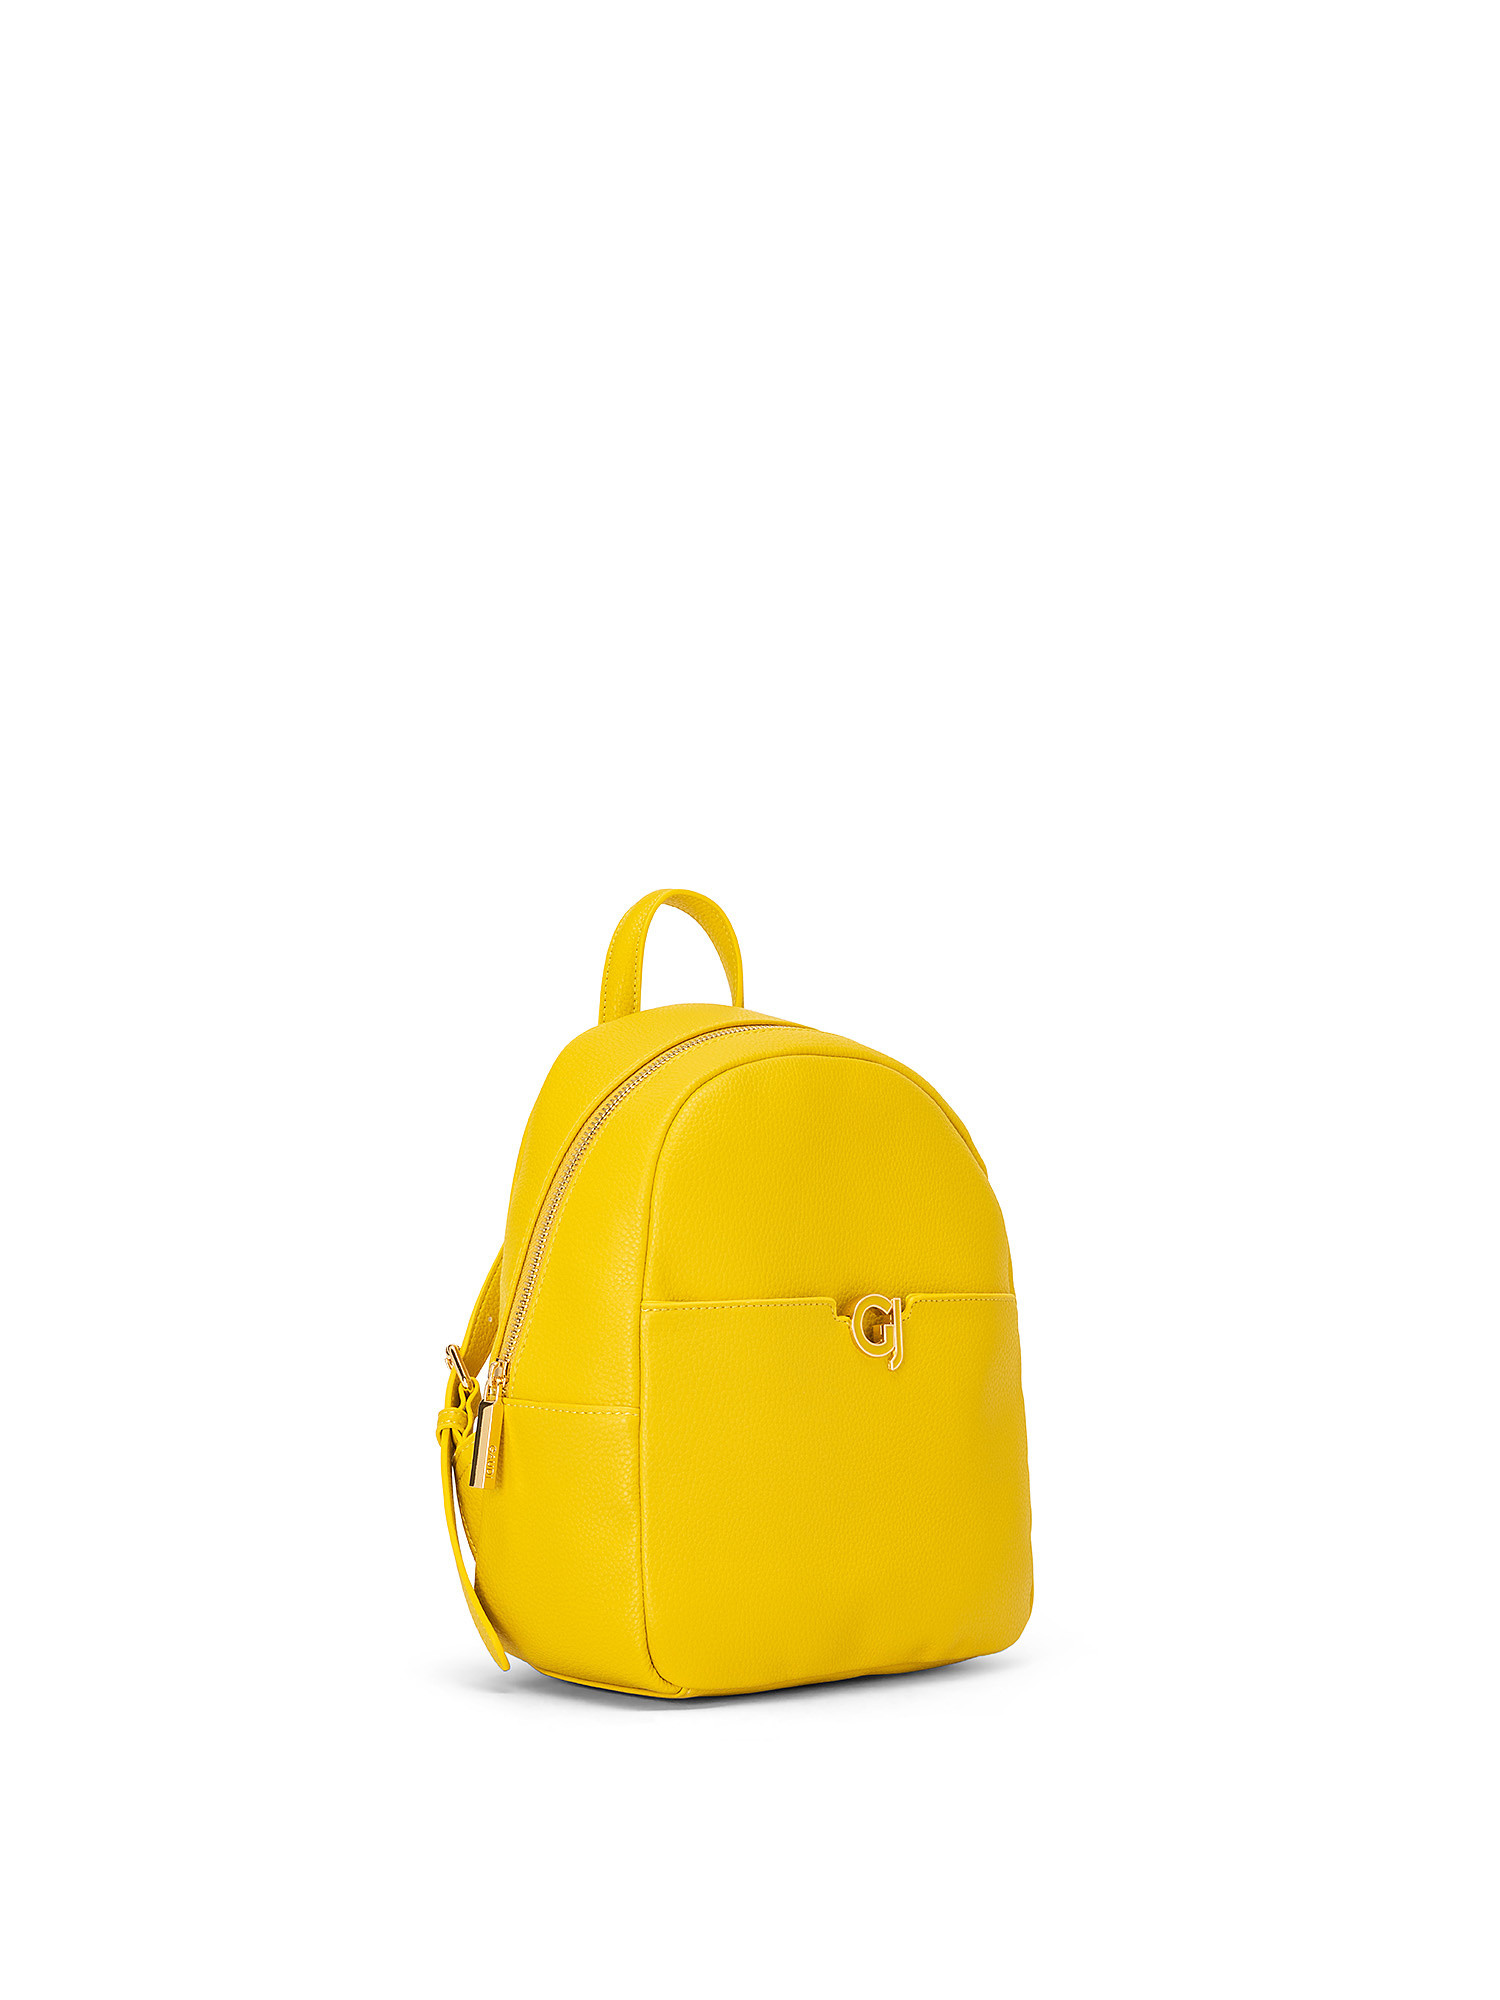 Sapphire backpack, Lime Green, large image number 1